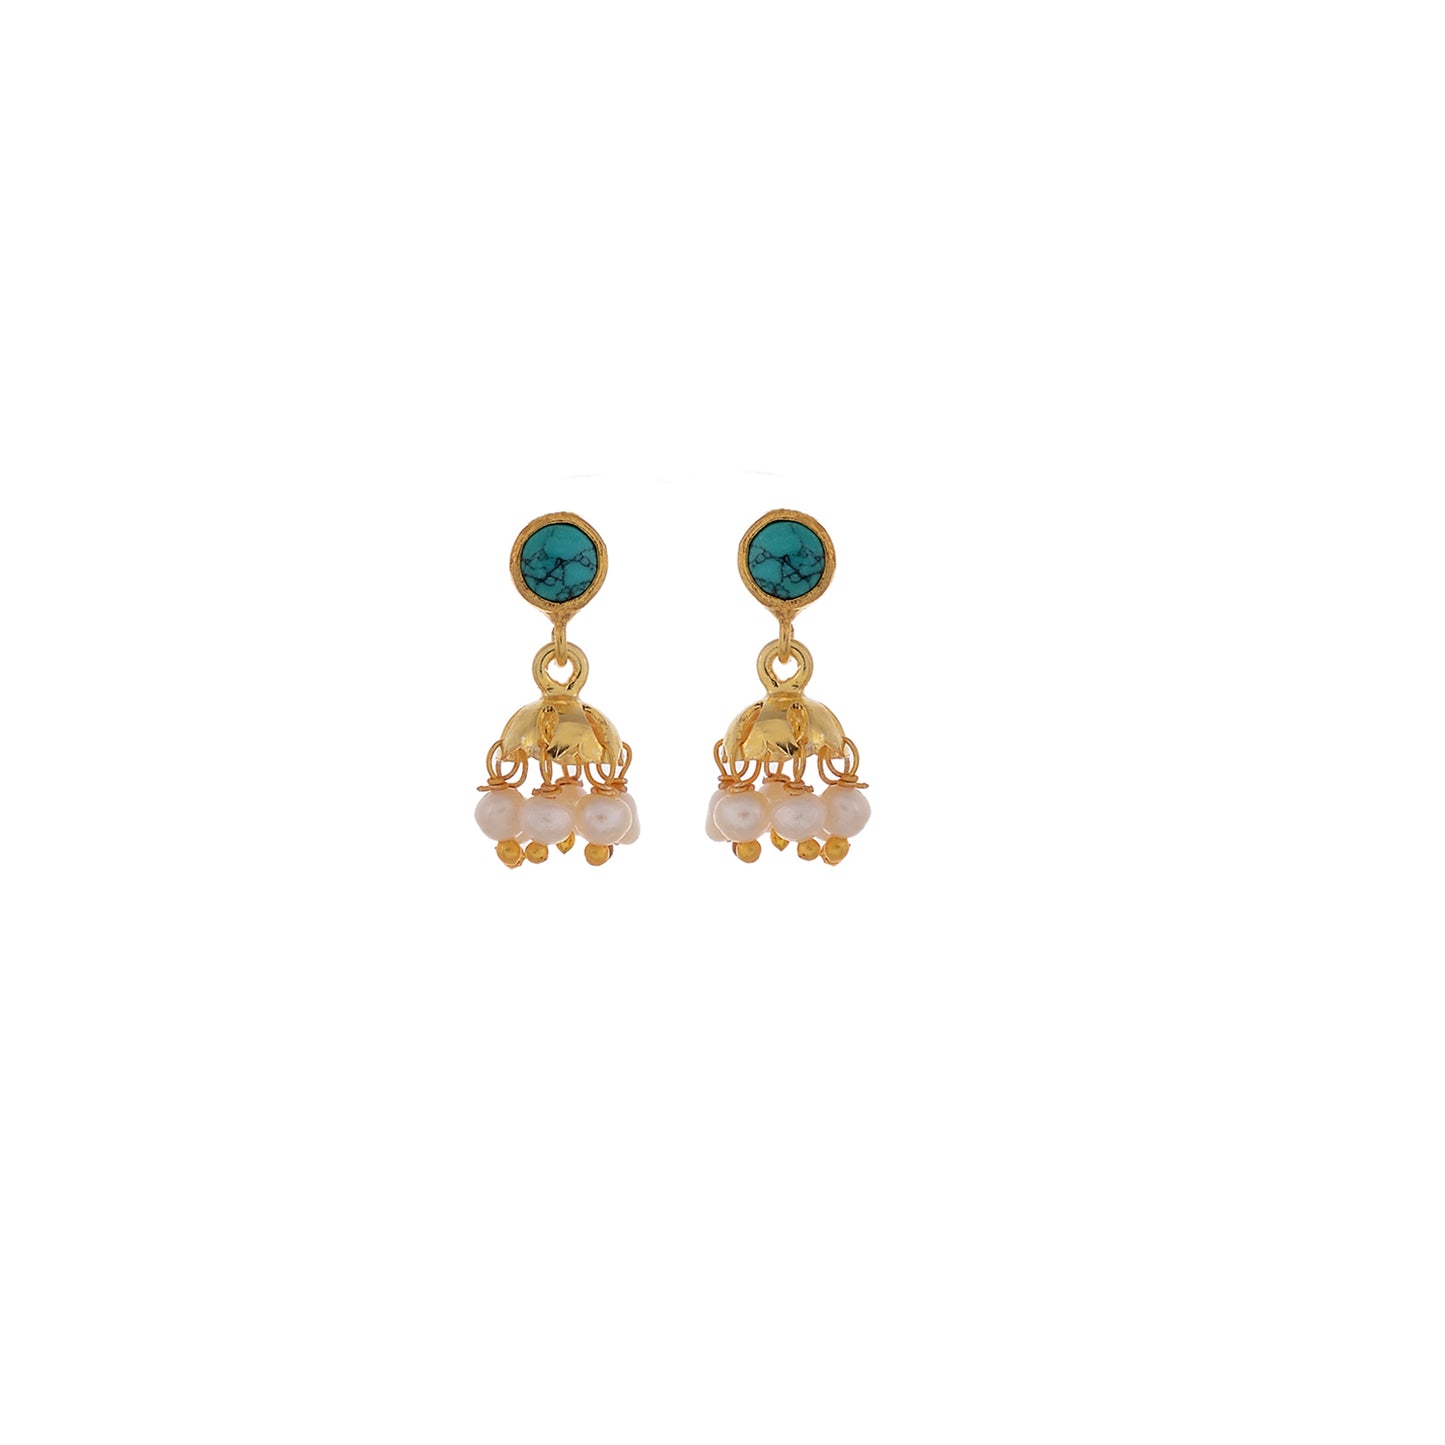 Small Gold Jhumki Hand Made in Sterling Silver With Pearl Earrings for Women Online